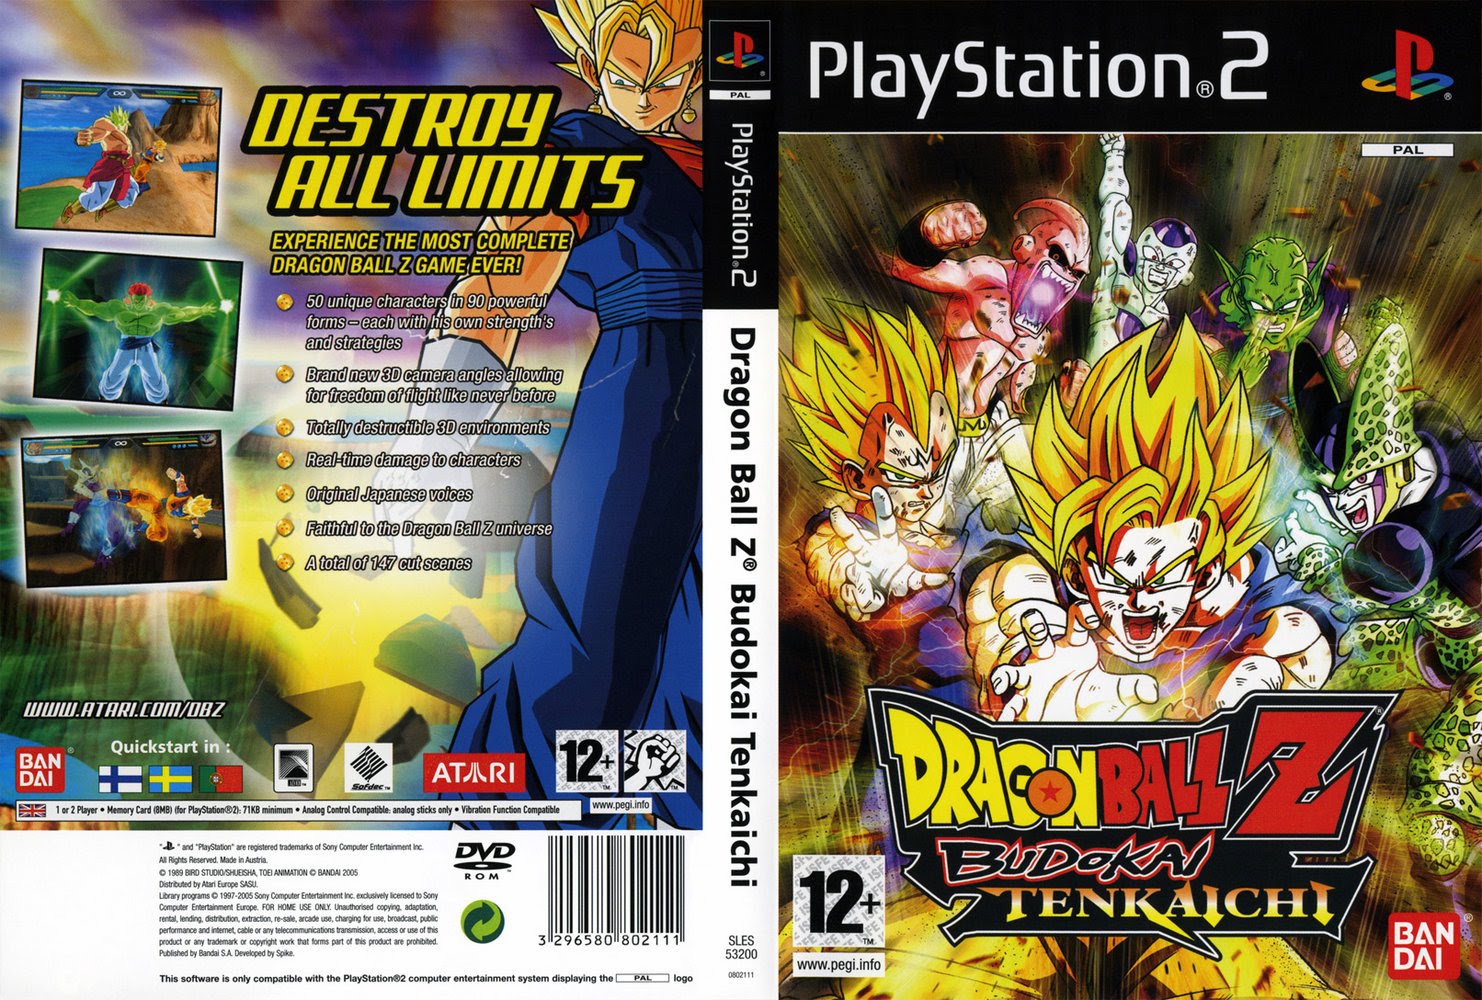 Dbz bt3 ps2 iso download pc